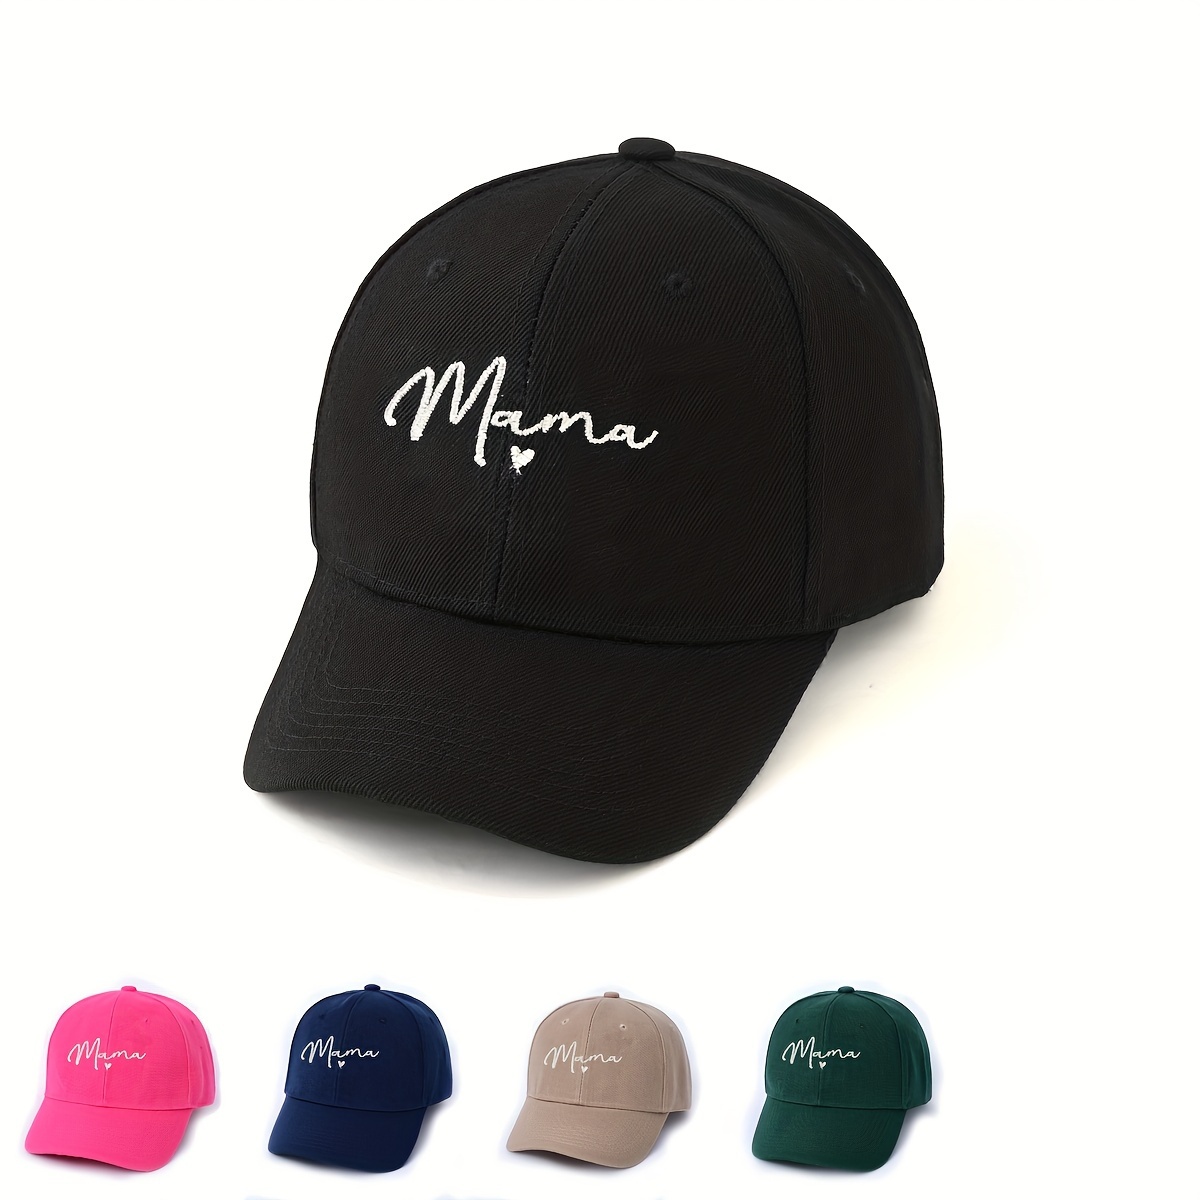 

Mama Embroidery Baseball Cap, Hip Hop Style Outdoor Sun Hat, Breathable Peaked Cap For Running, Fishing, Outdoor Sports